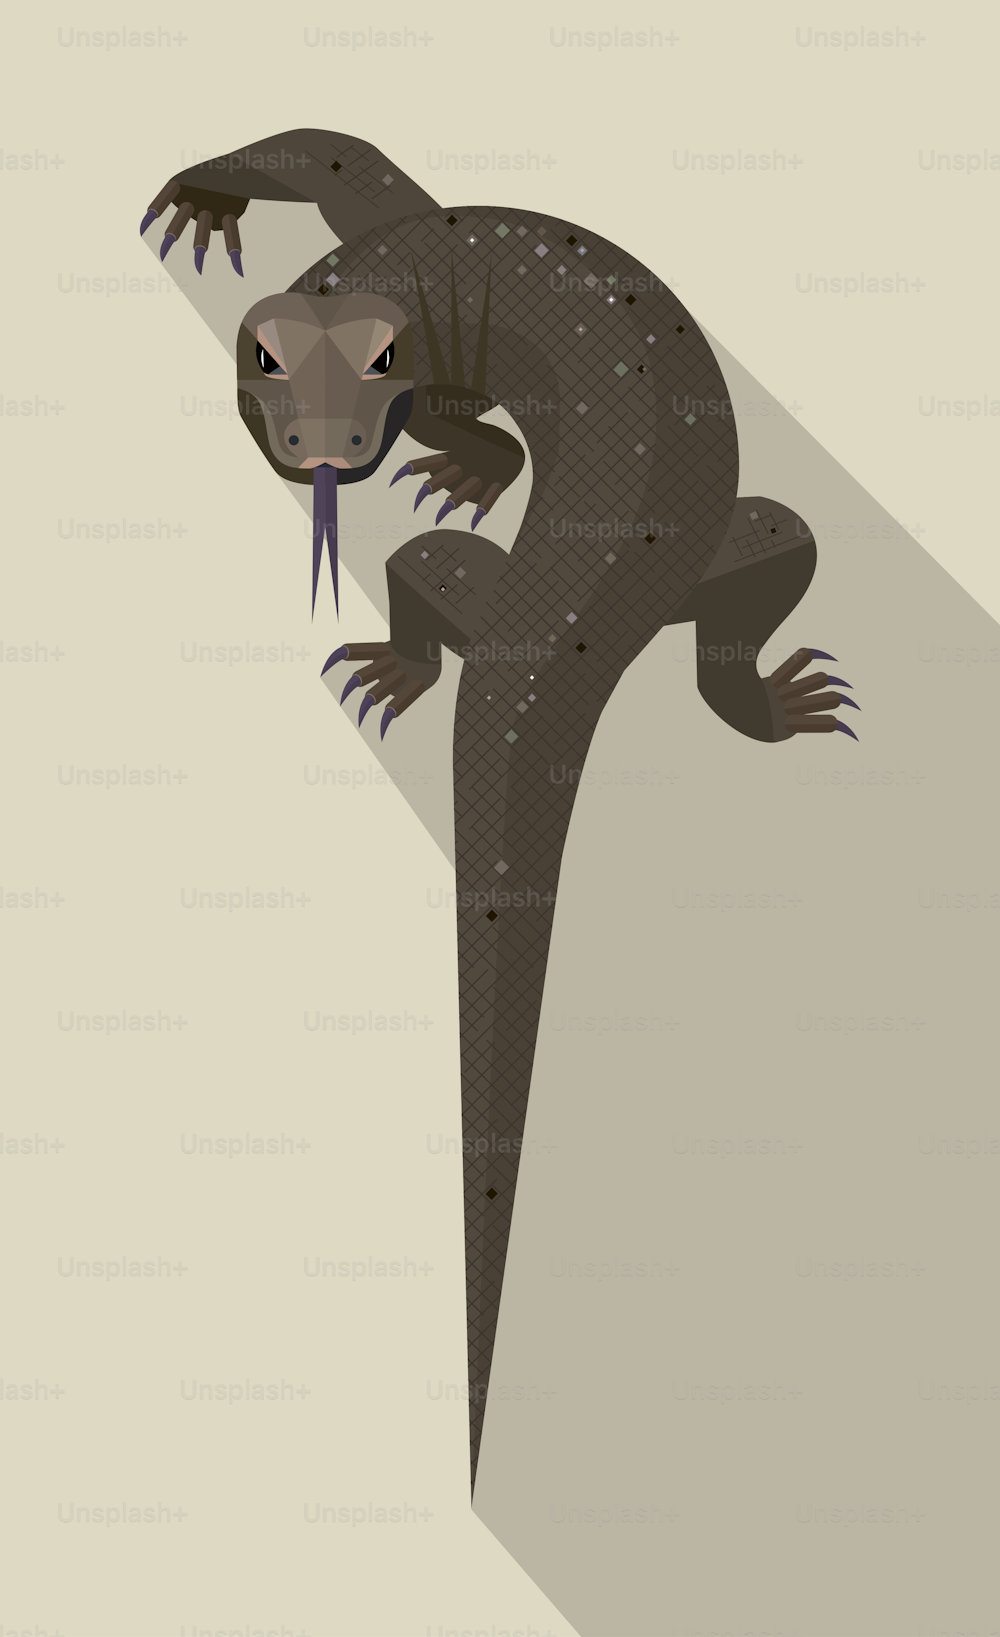 Monitor lizard, known as Komodo dragon, in an aggressive position on a sandy background, stylized image